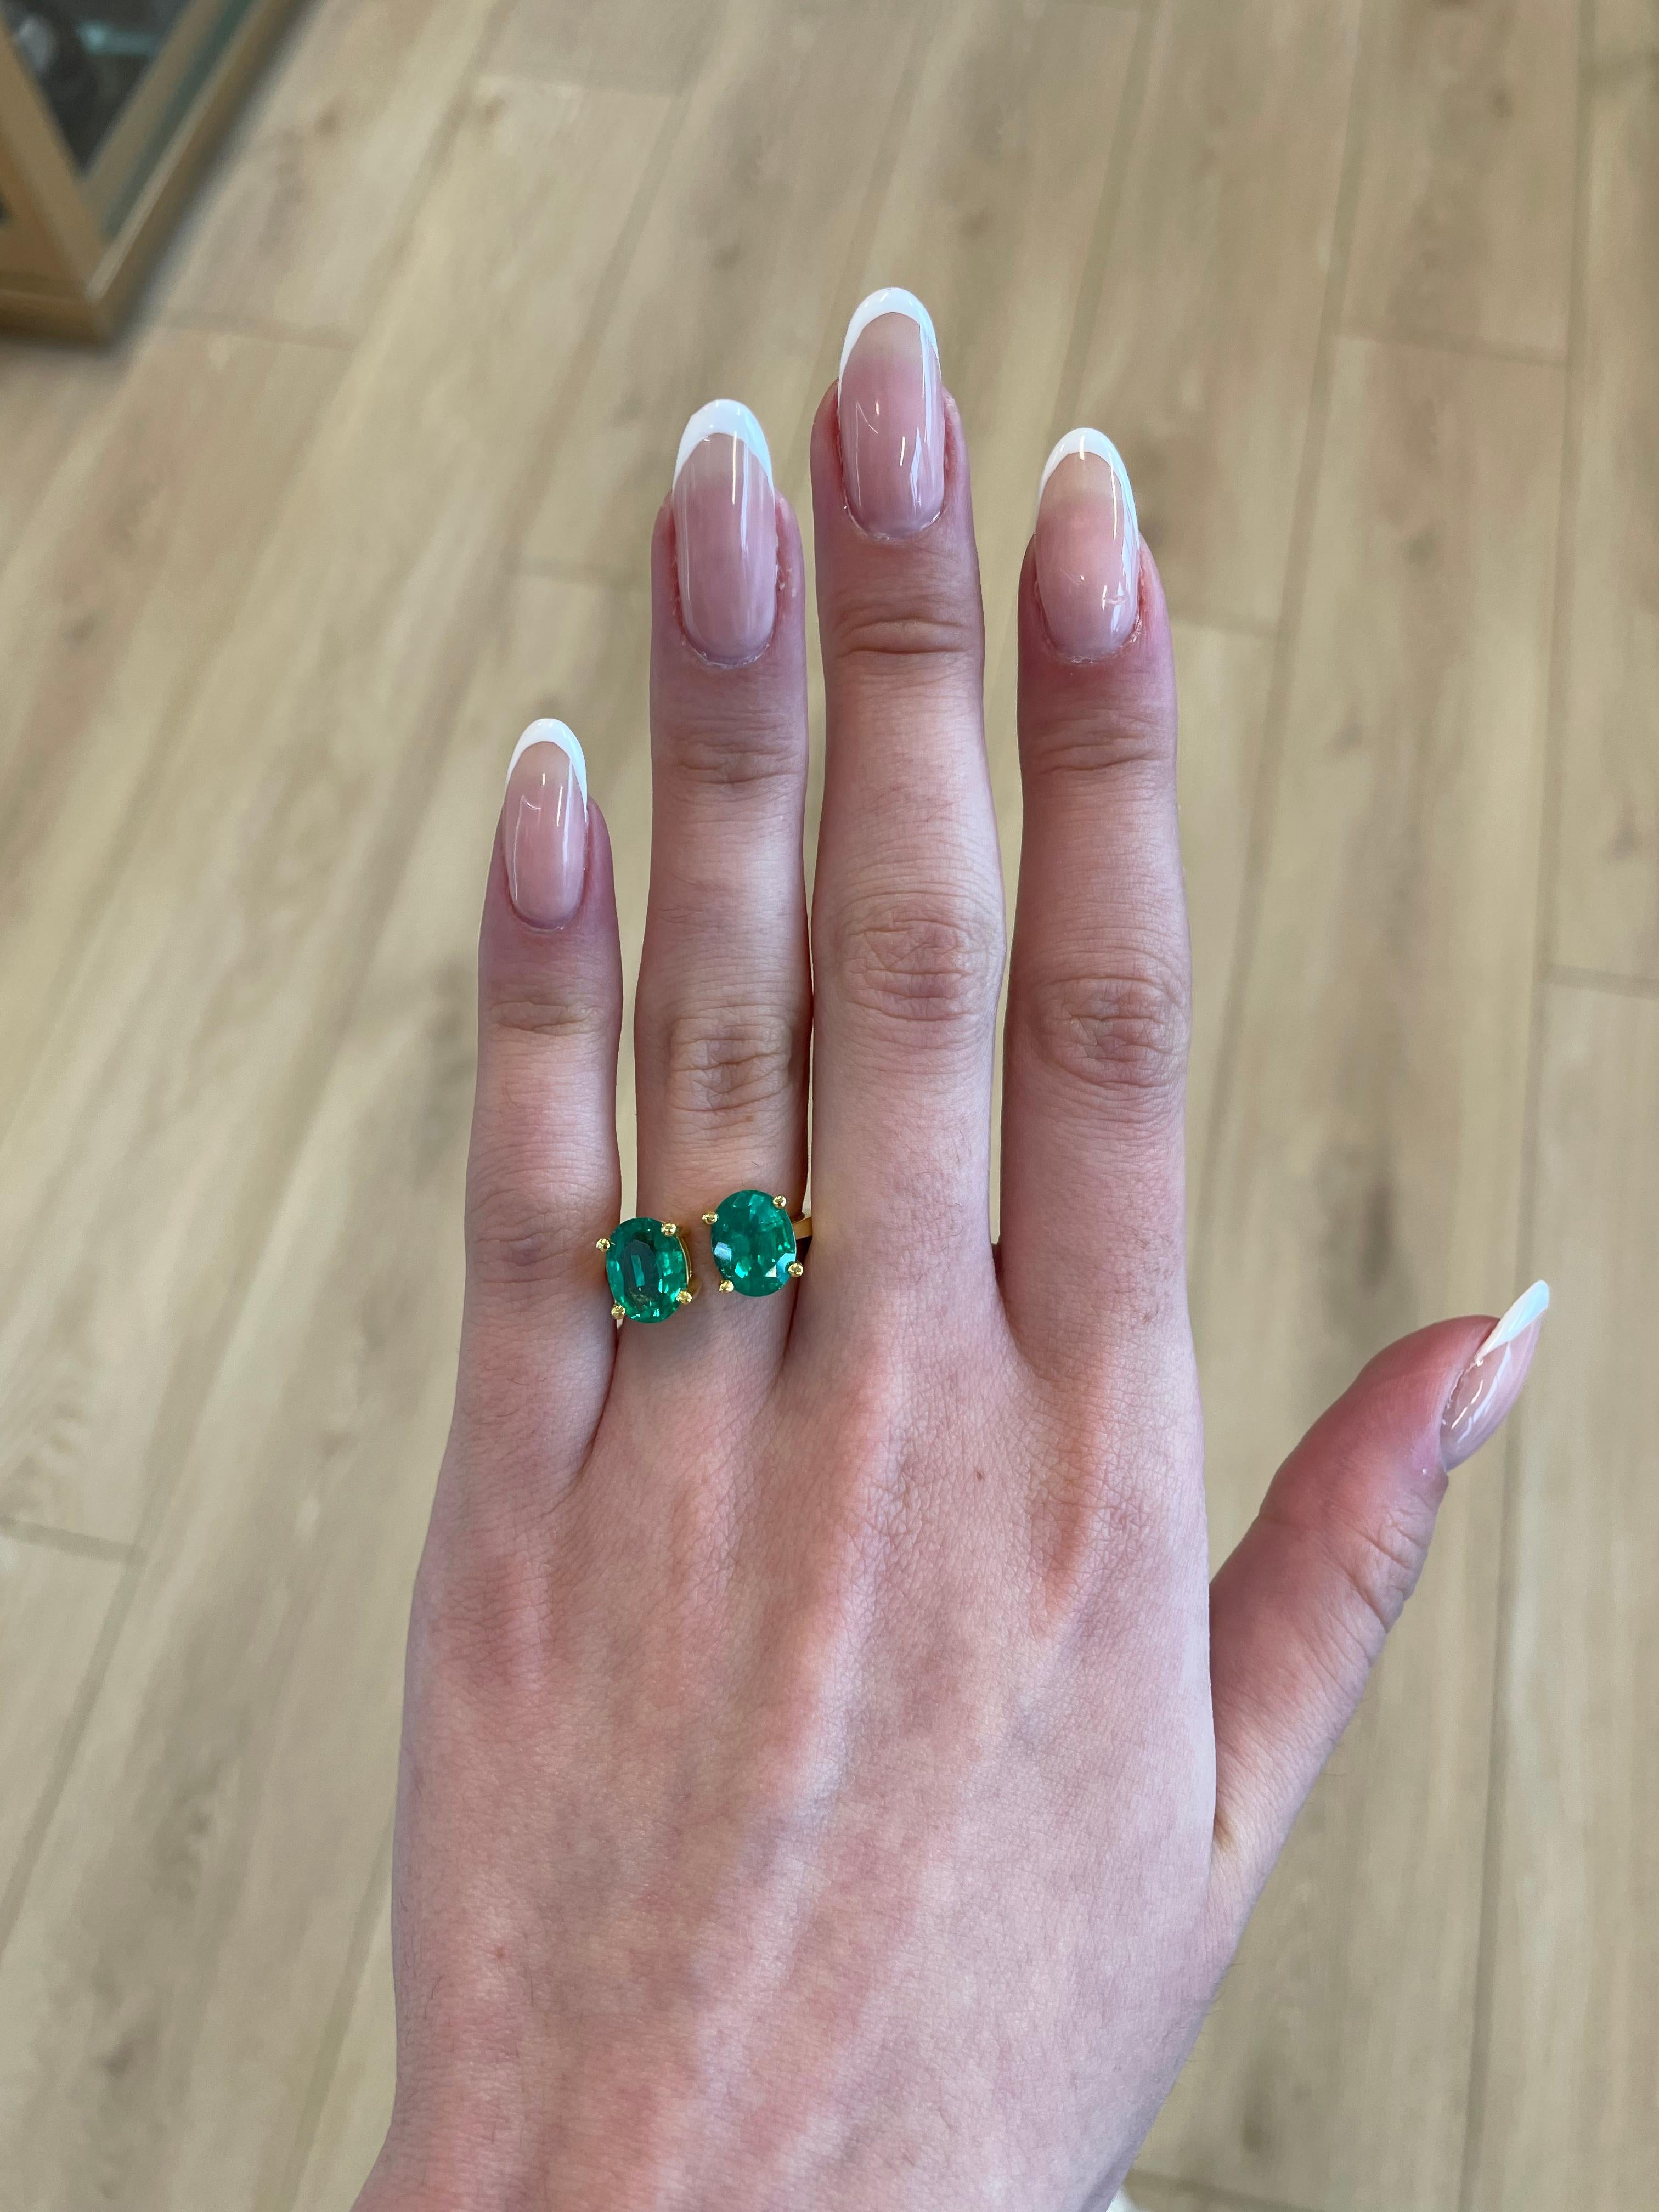 Stunning modern floating emerald and diamond toi et moi ring. By Alexander Beverly Hills.
2 oval emeralds, 3.78 carats apx F2. 18-karat yellow gold, 6.25 grams, current ring size 6.5.
Accommodated with an up-to-date appraisal by a GIA G.G. once